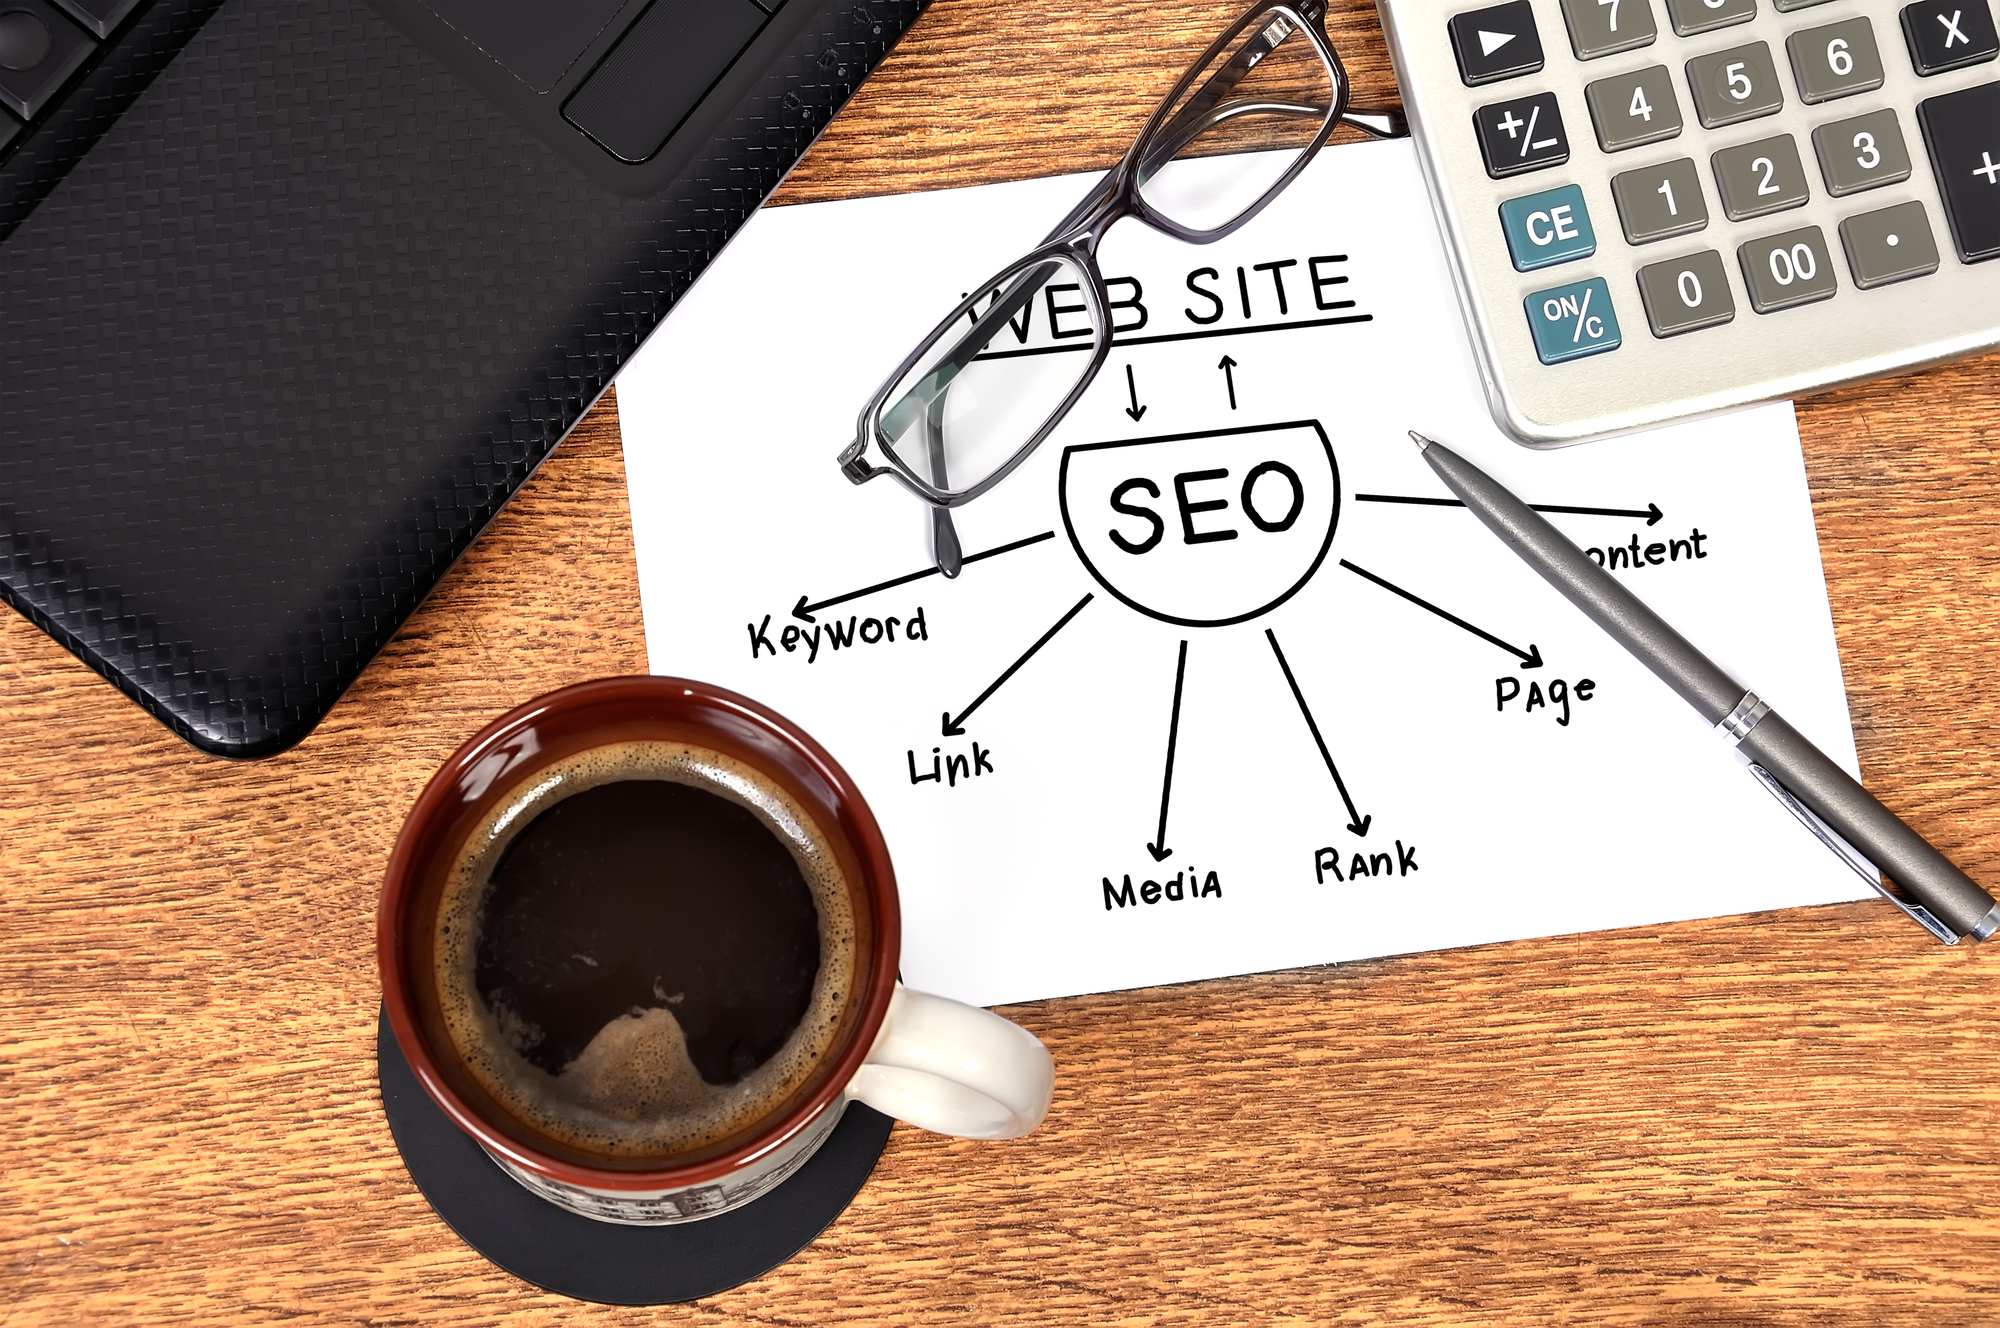 Top view of illustration showing SEO scheme on white paper with adjacent coffee mug, eyeglasses and pen